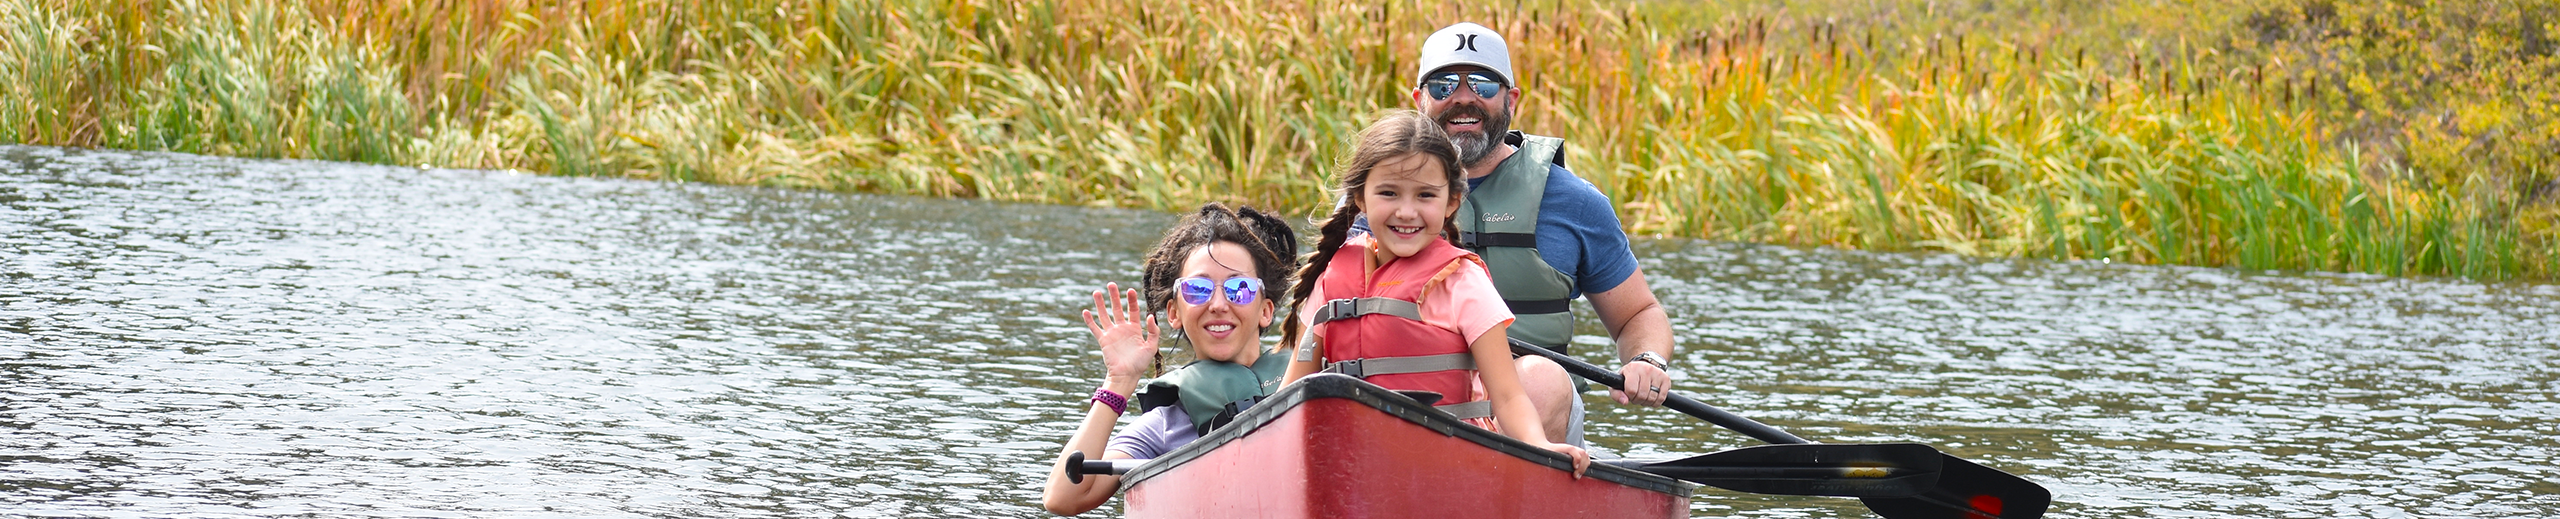 Family in a canoe on the water